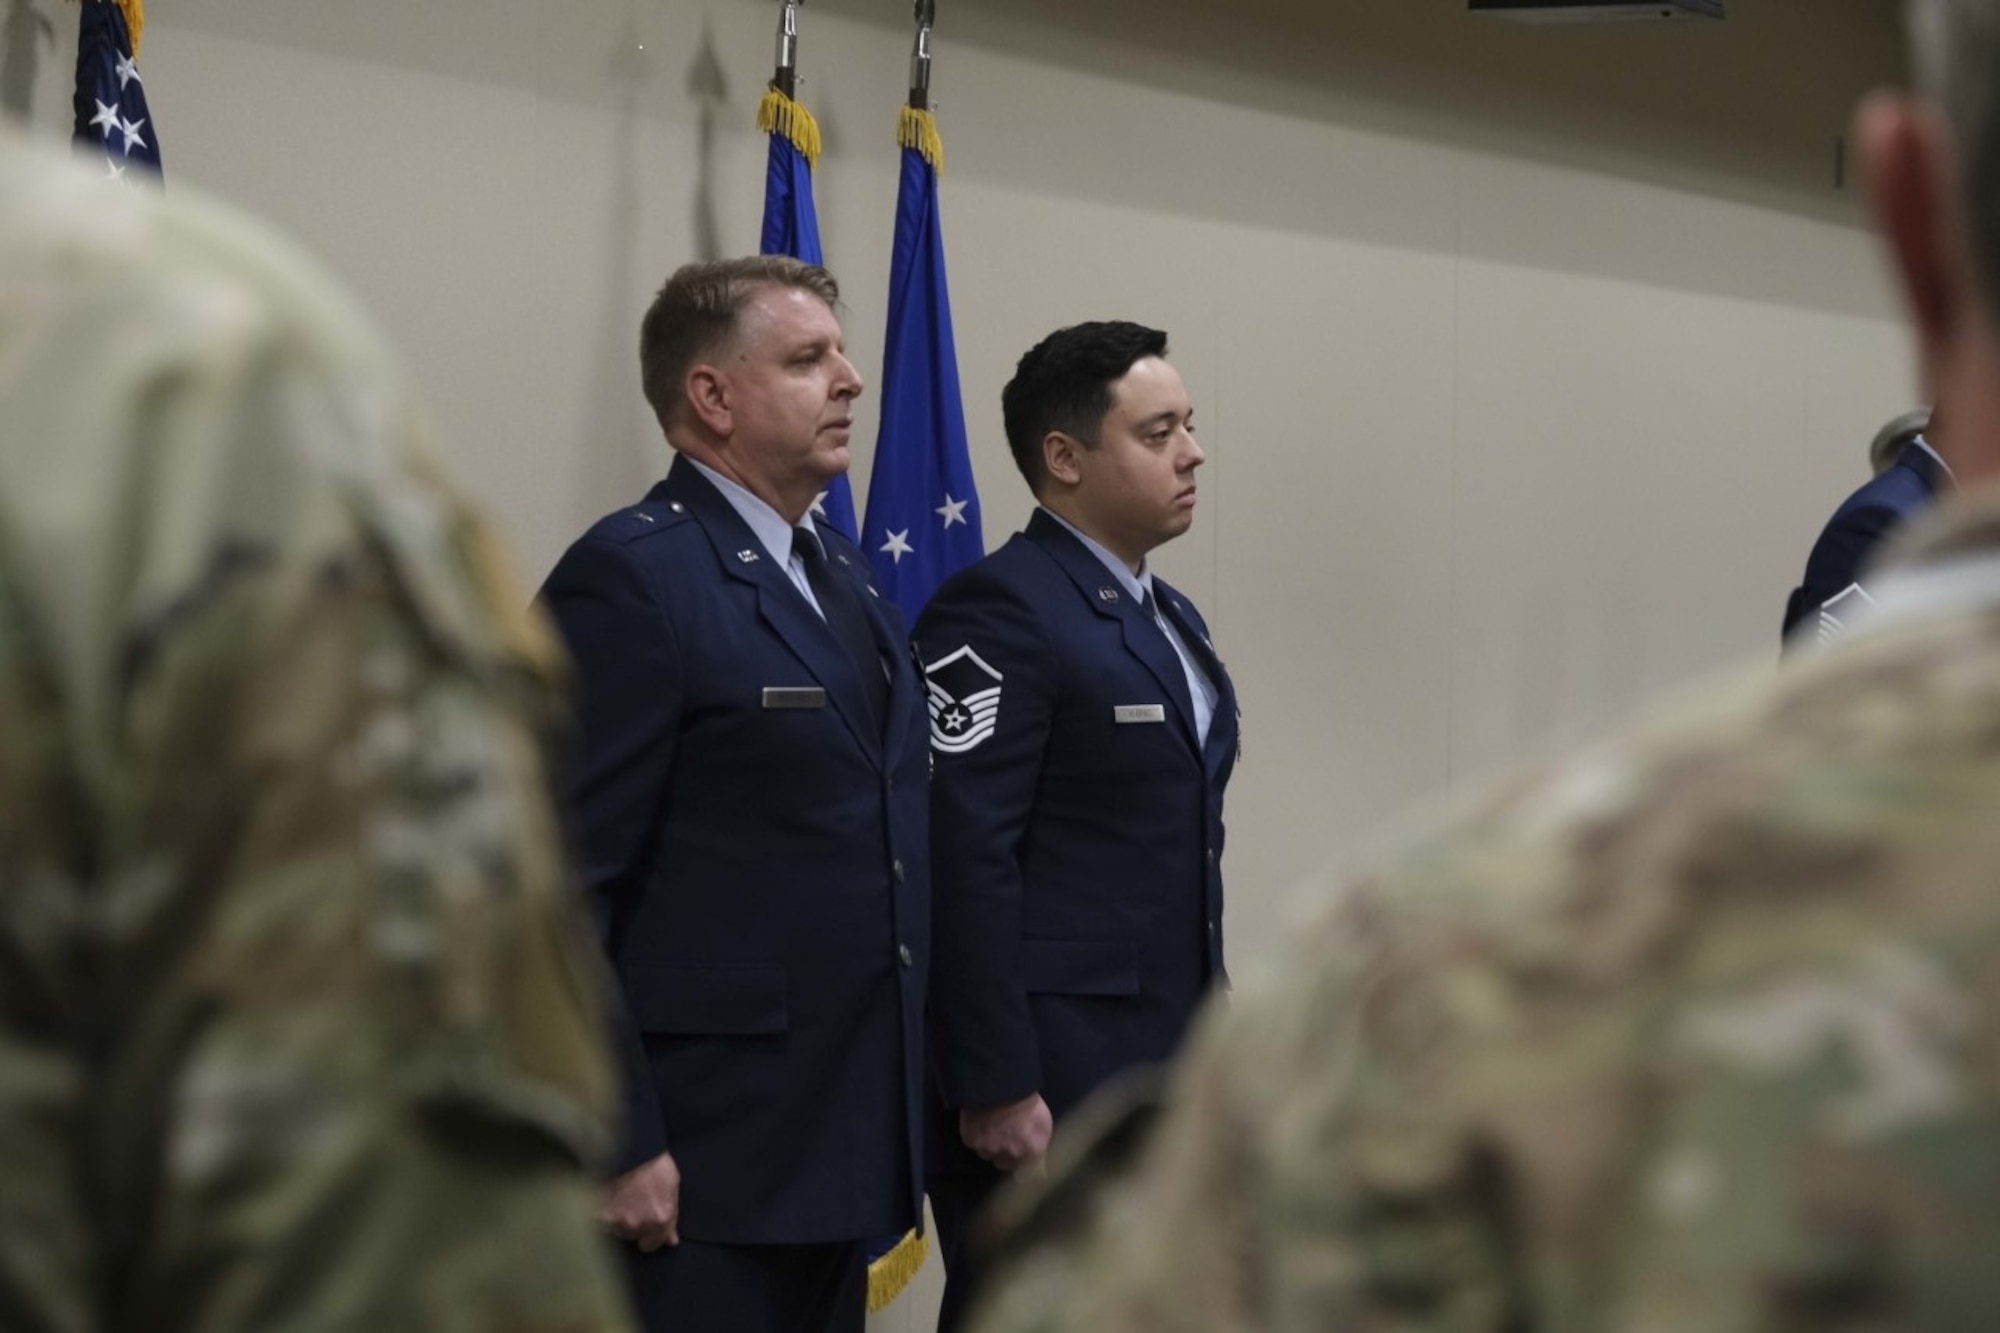 Special Agent Joshua Klepac, right, who deployed as part of OSI Expeditionary Detachment 2506 to Camp Simba in Manda Bay, Kenya, from Nov. 2019 to Feb. 2020, received the Bronze Star with Valor for his actions during a presentation ceremony at OSI headquarters in Quantico, Virginia. (U.S. Air Force photo by Tech. Sgt. Joshua King, OSI/PA)